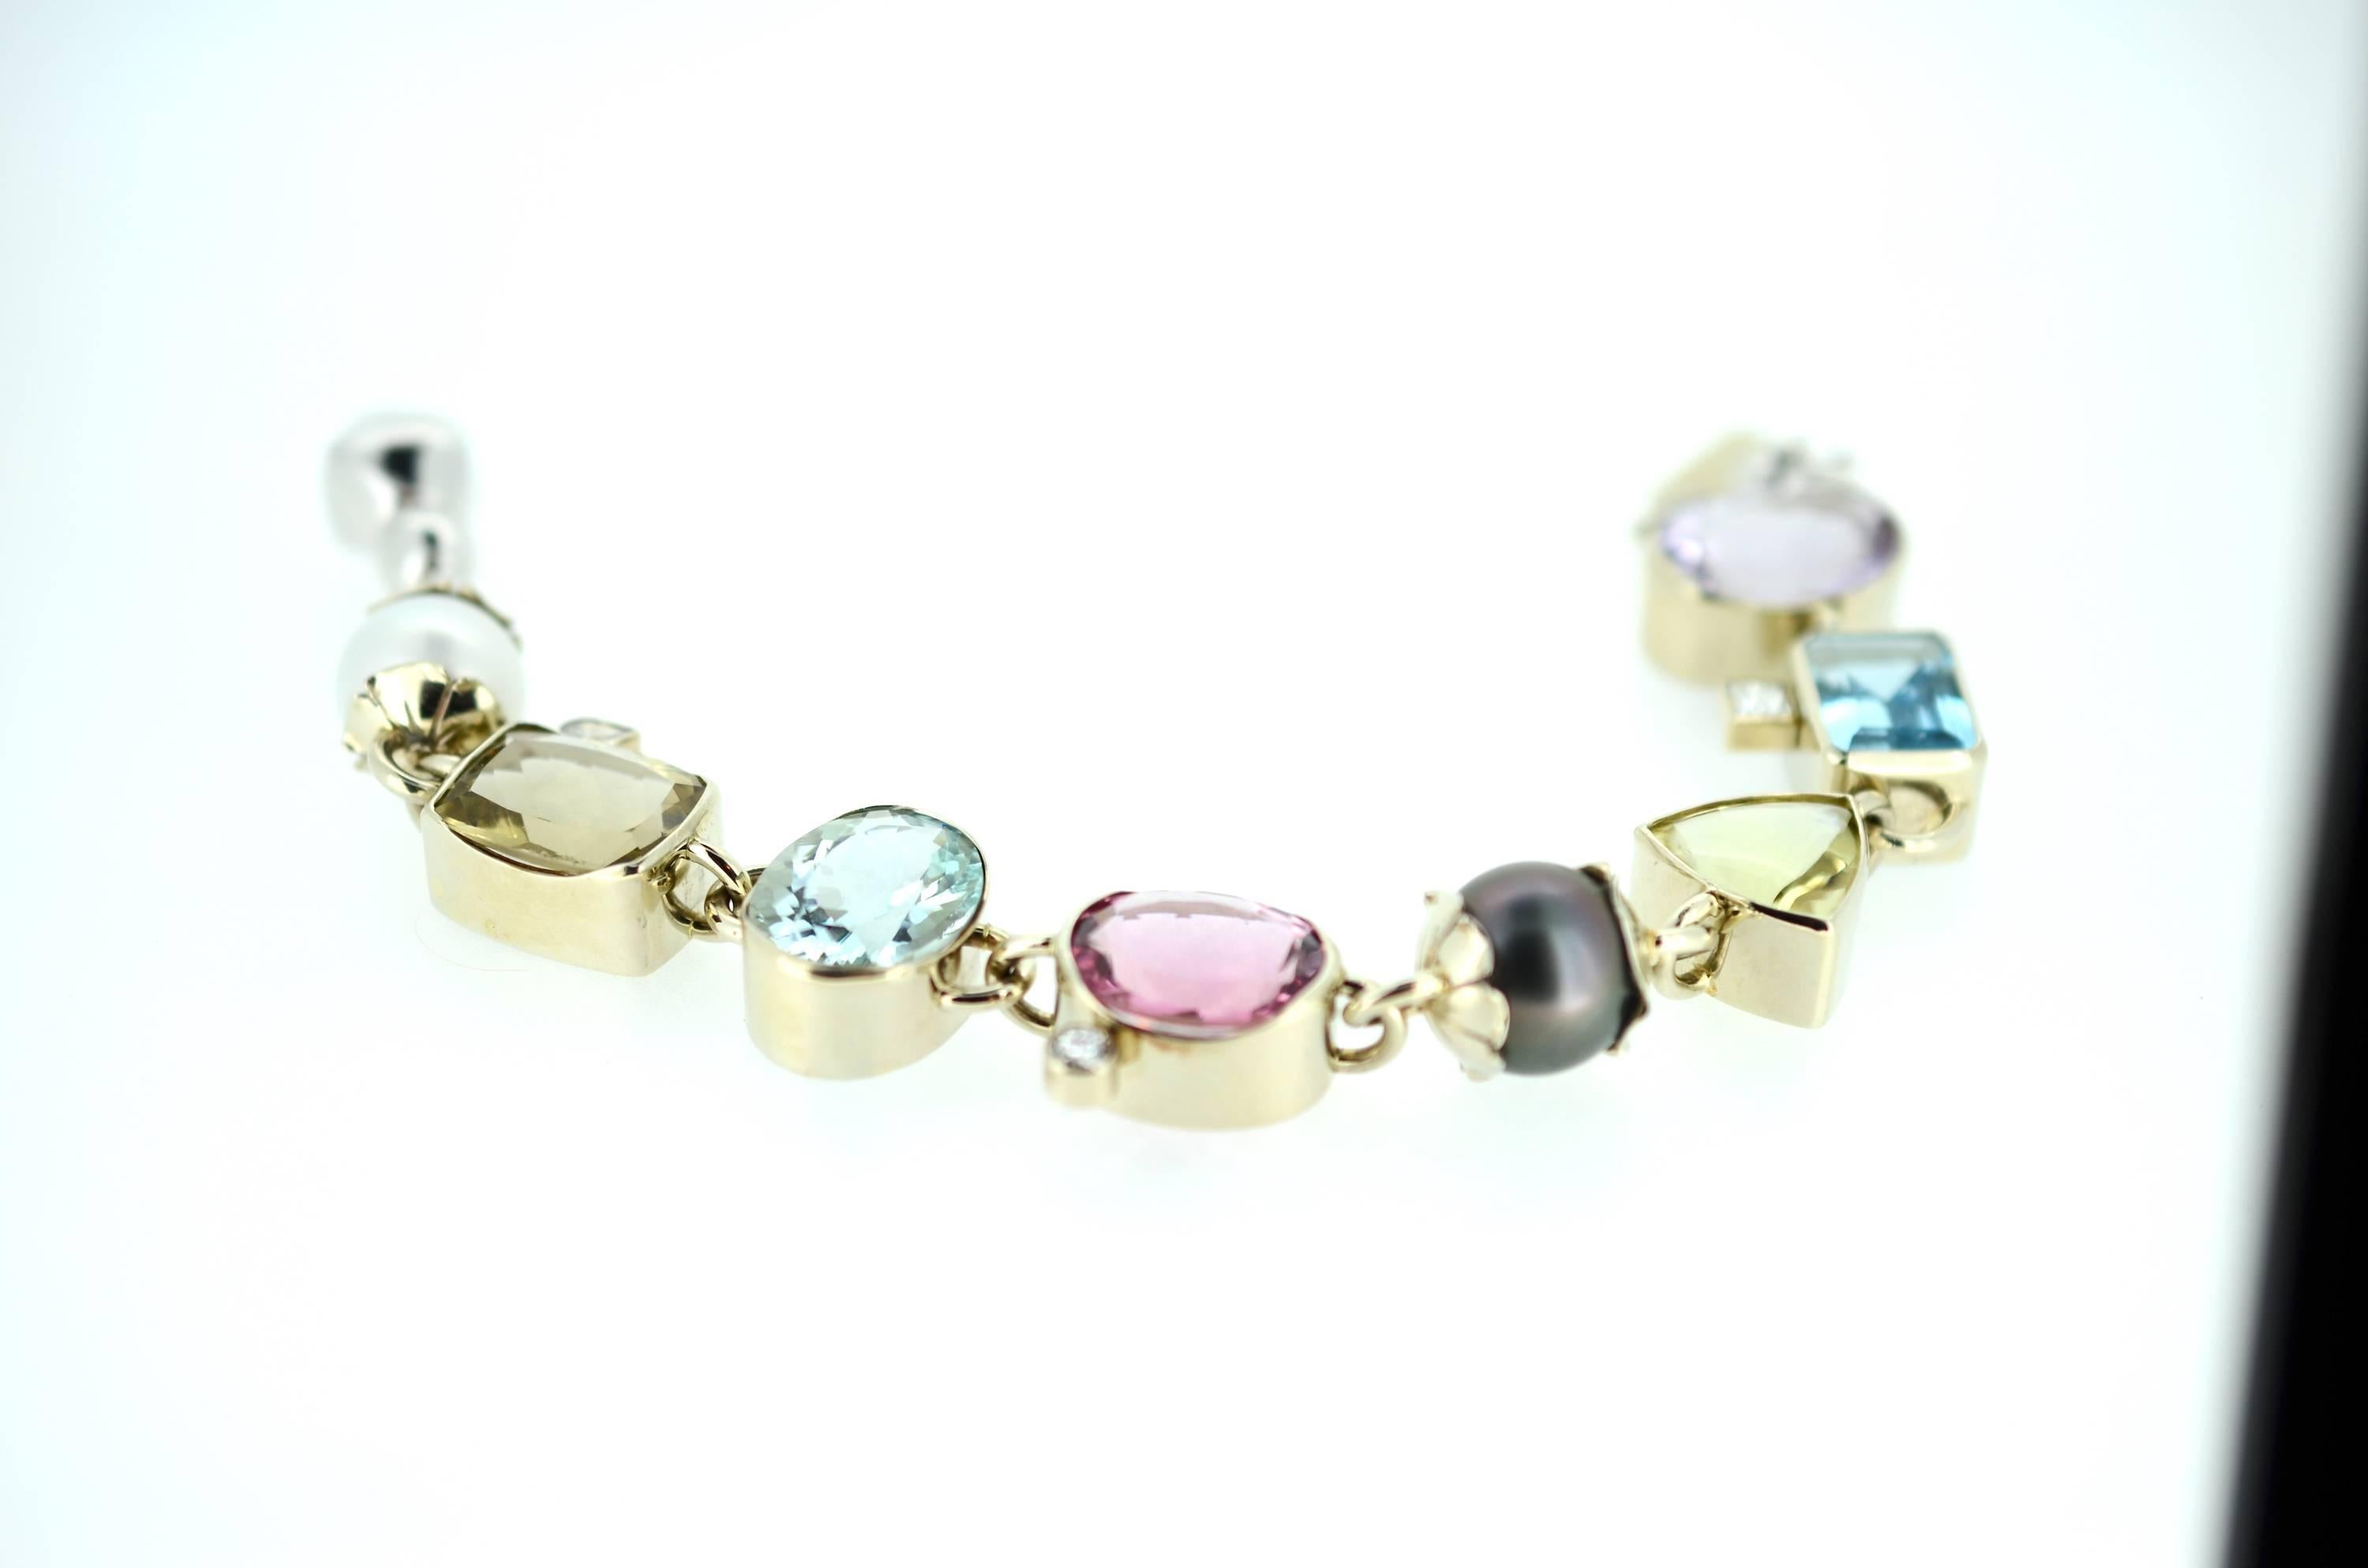 Magnificent multi-gemstone bracelet hand fabricated in 18kt white gold with 18kt white gold clasp. Bezel set stones:
13.0mm Tahitian pearl, 12.5mm South Sea pearl, Two Lemon Citrine: 14.5X14.5mm Trillion, 17.0X13.0mm Cushion Cut, Pink Tourmaline